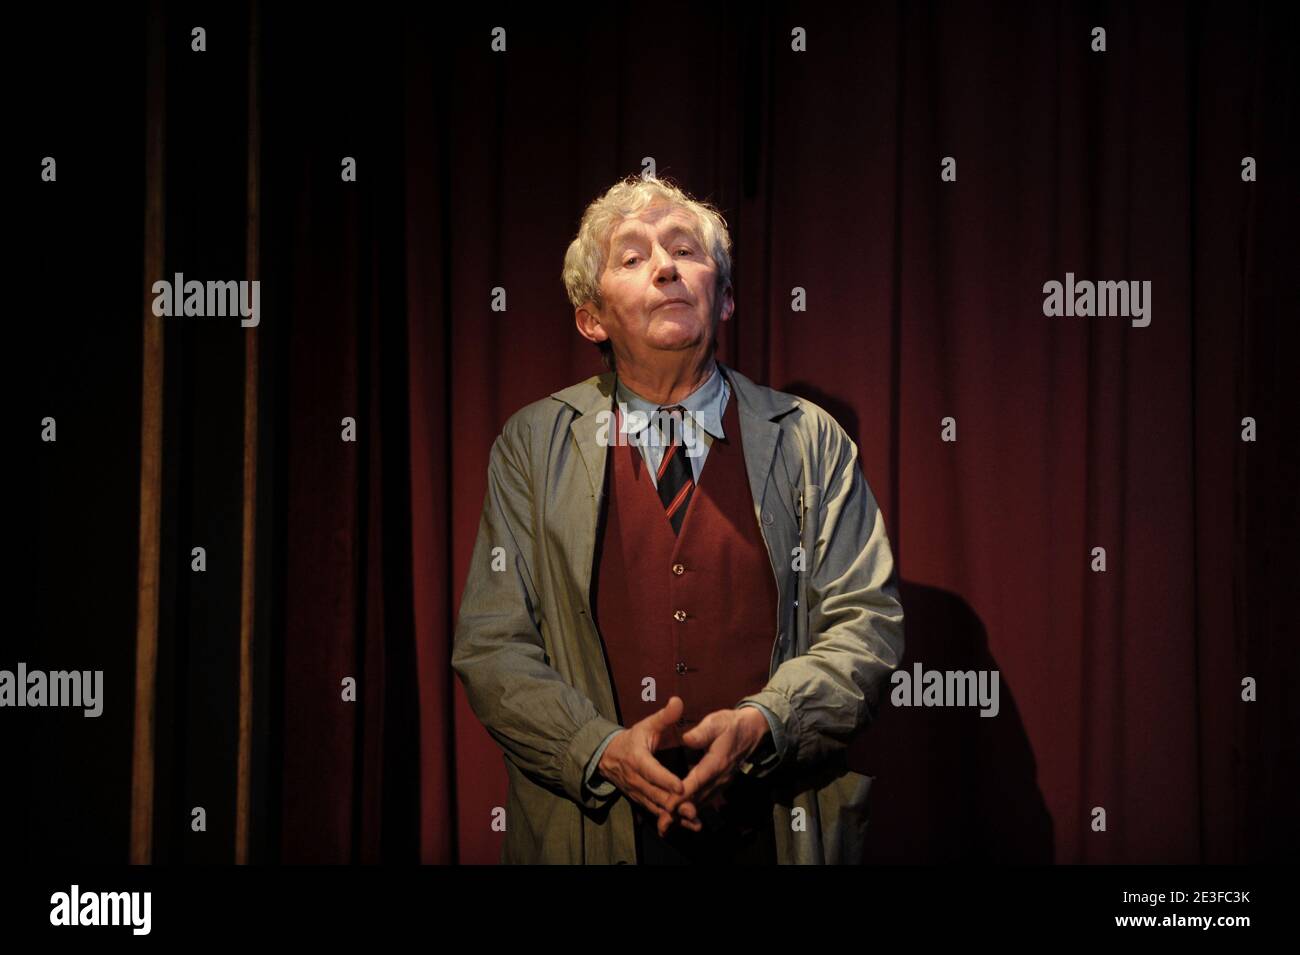 Claude Aufaure during curtain call of the play 'L'habilleur' staged by Laurent Terzieff and written by Ronald Harwood at the Theatre Rive Gauche in Paris, France on February 28, 2009. Photo by Raymond Delalande/ABACAPRESS.COM Stock Photo